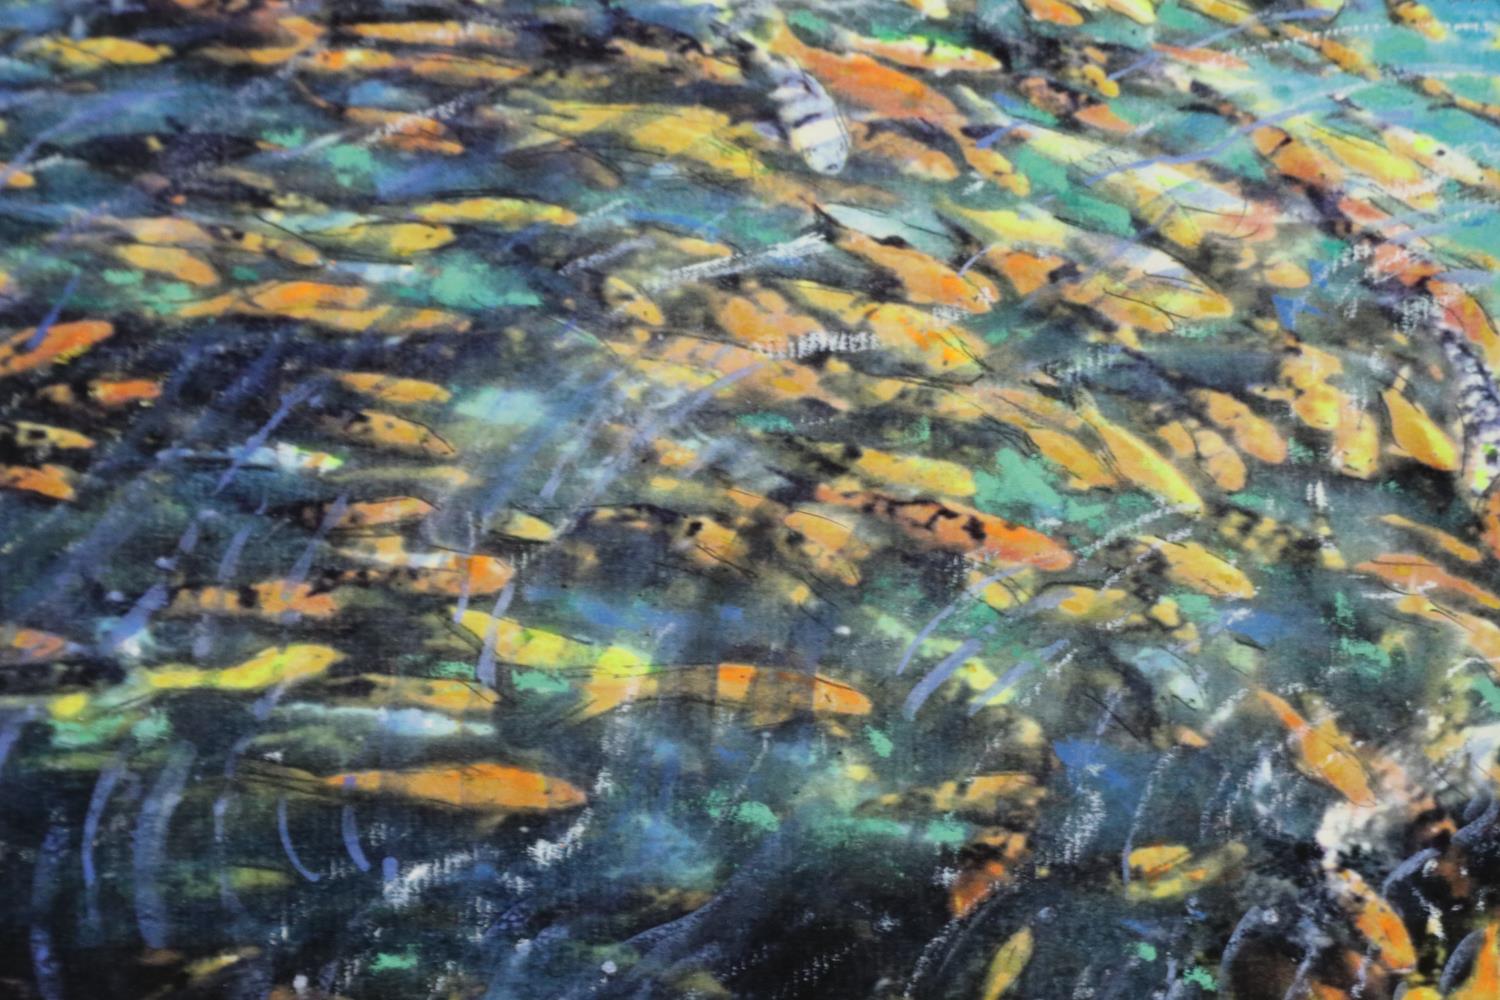 Harold Riley (B. 1934): artist signed print, Koi Carp, dated 1972, 26 x 37 cm. Not available for